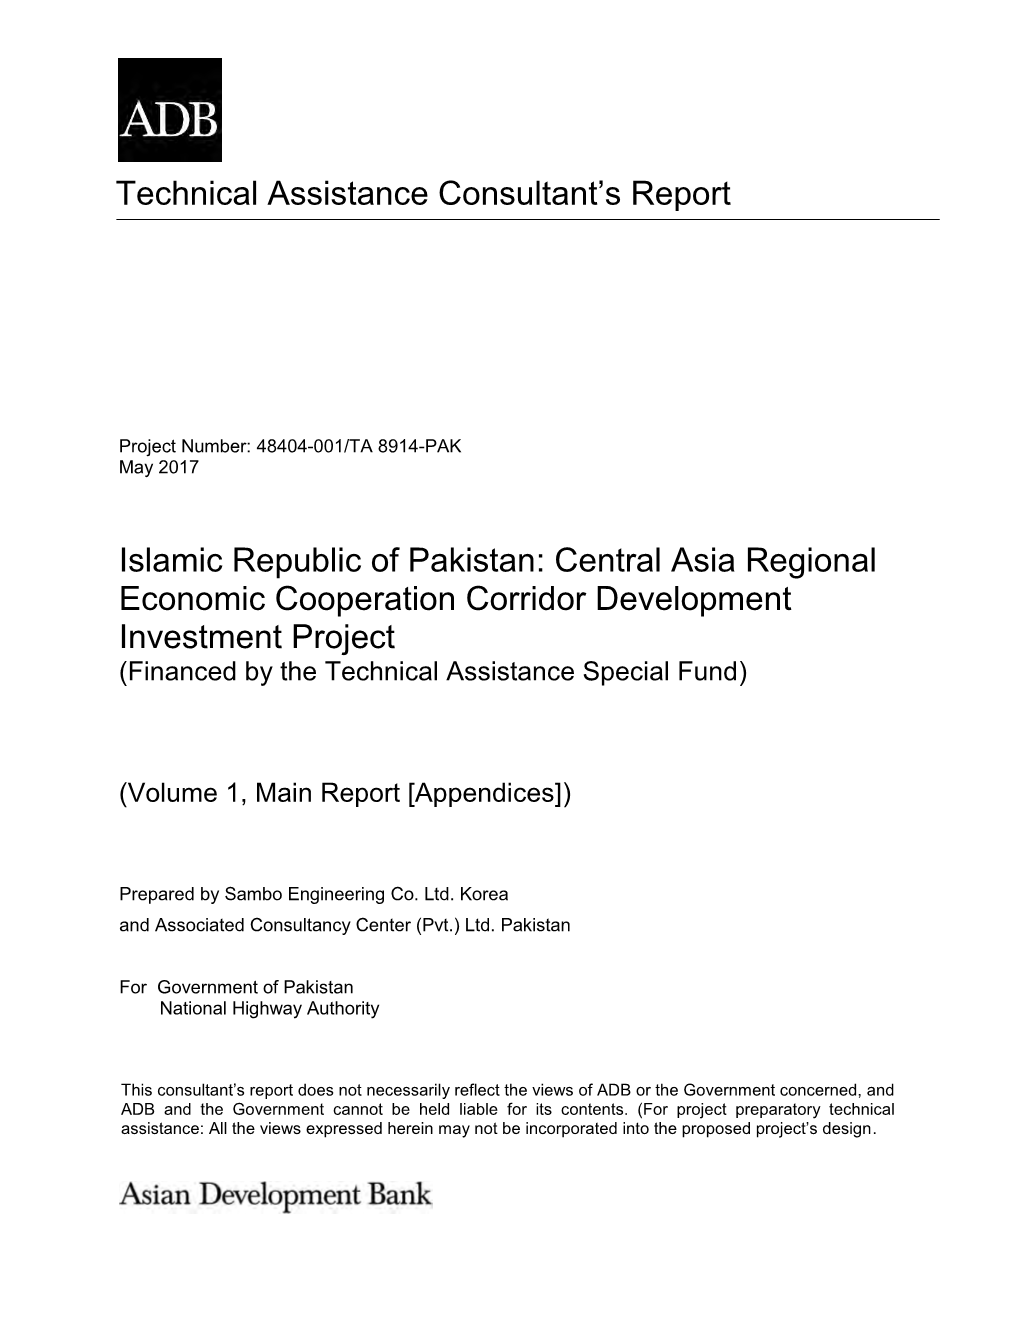 Technical Assistance Consultant's Report Islamic Republic of Pakistan